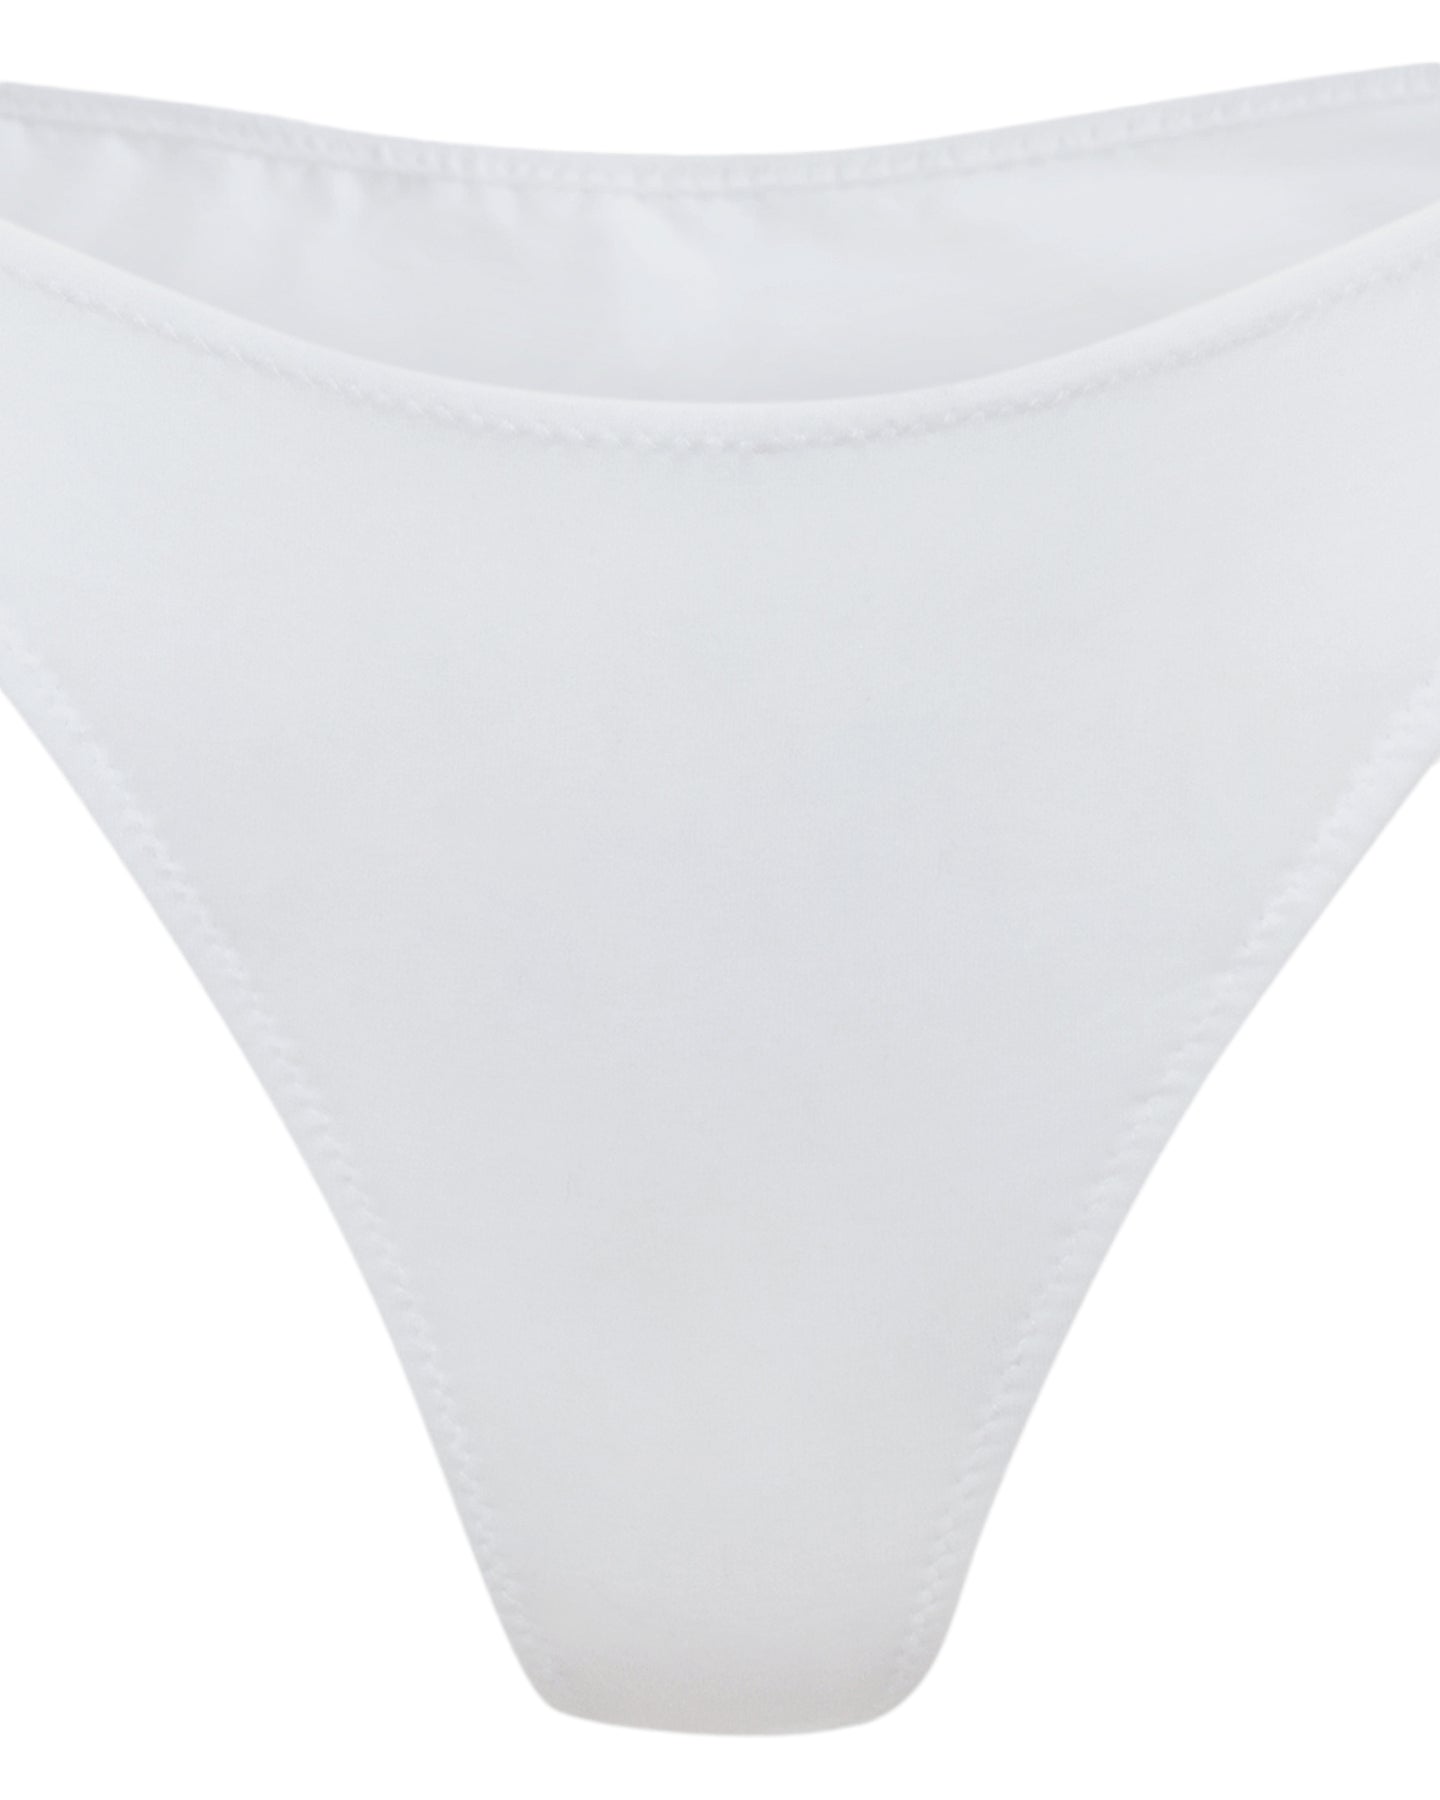 Issy | Organic Sexy Lingerie Women's Underwear High-Waisted Thong